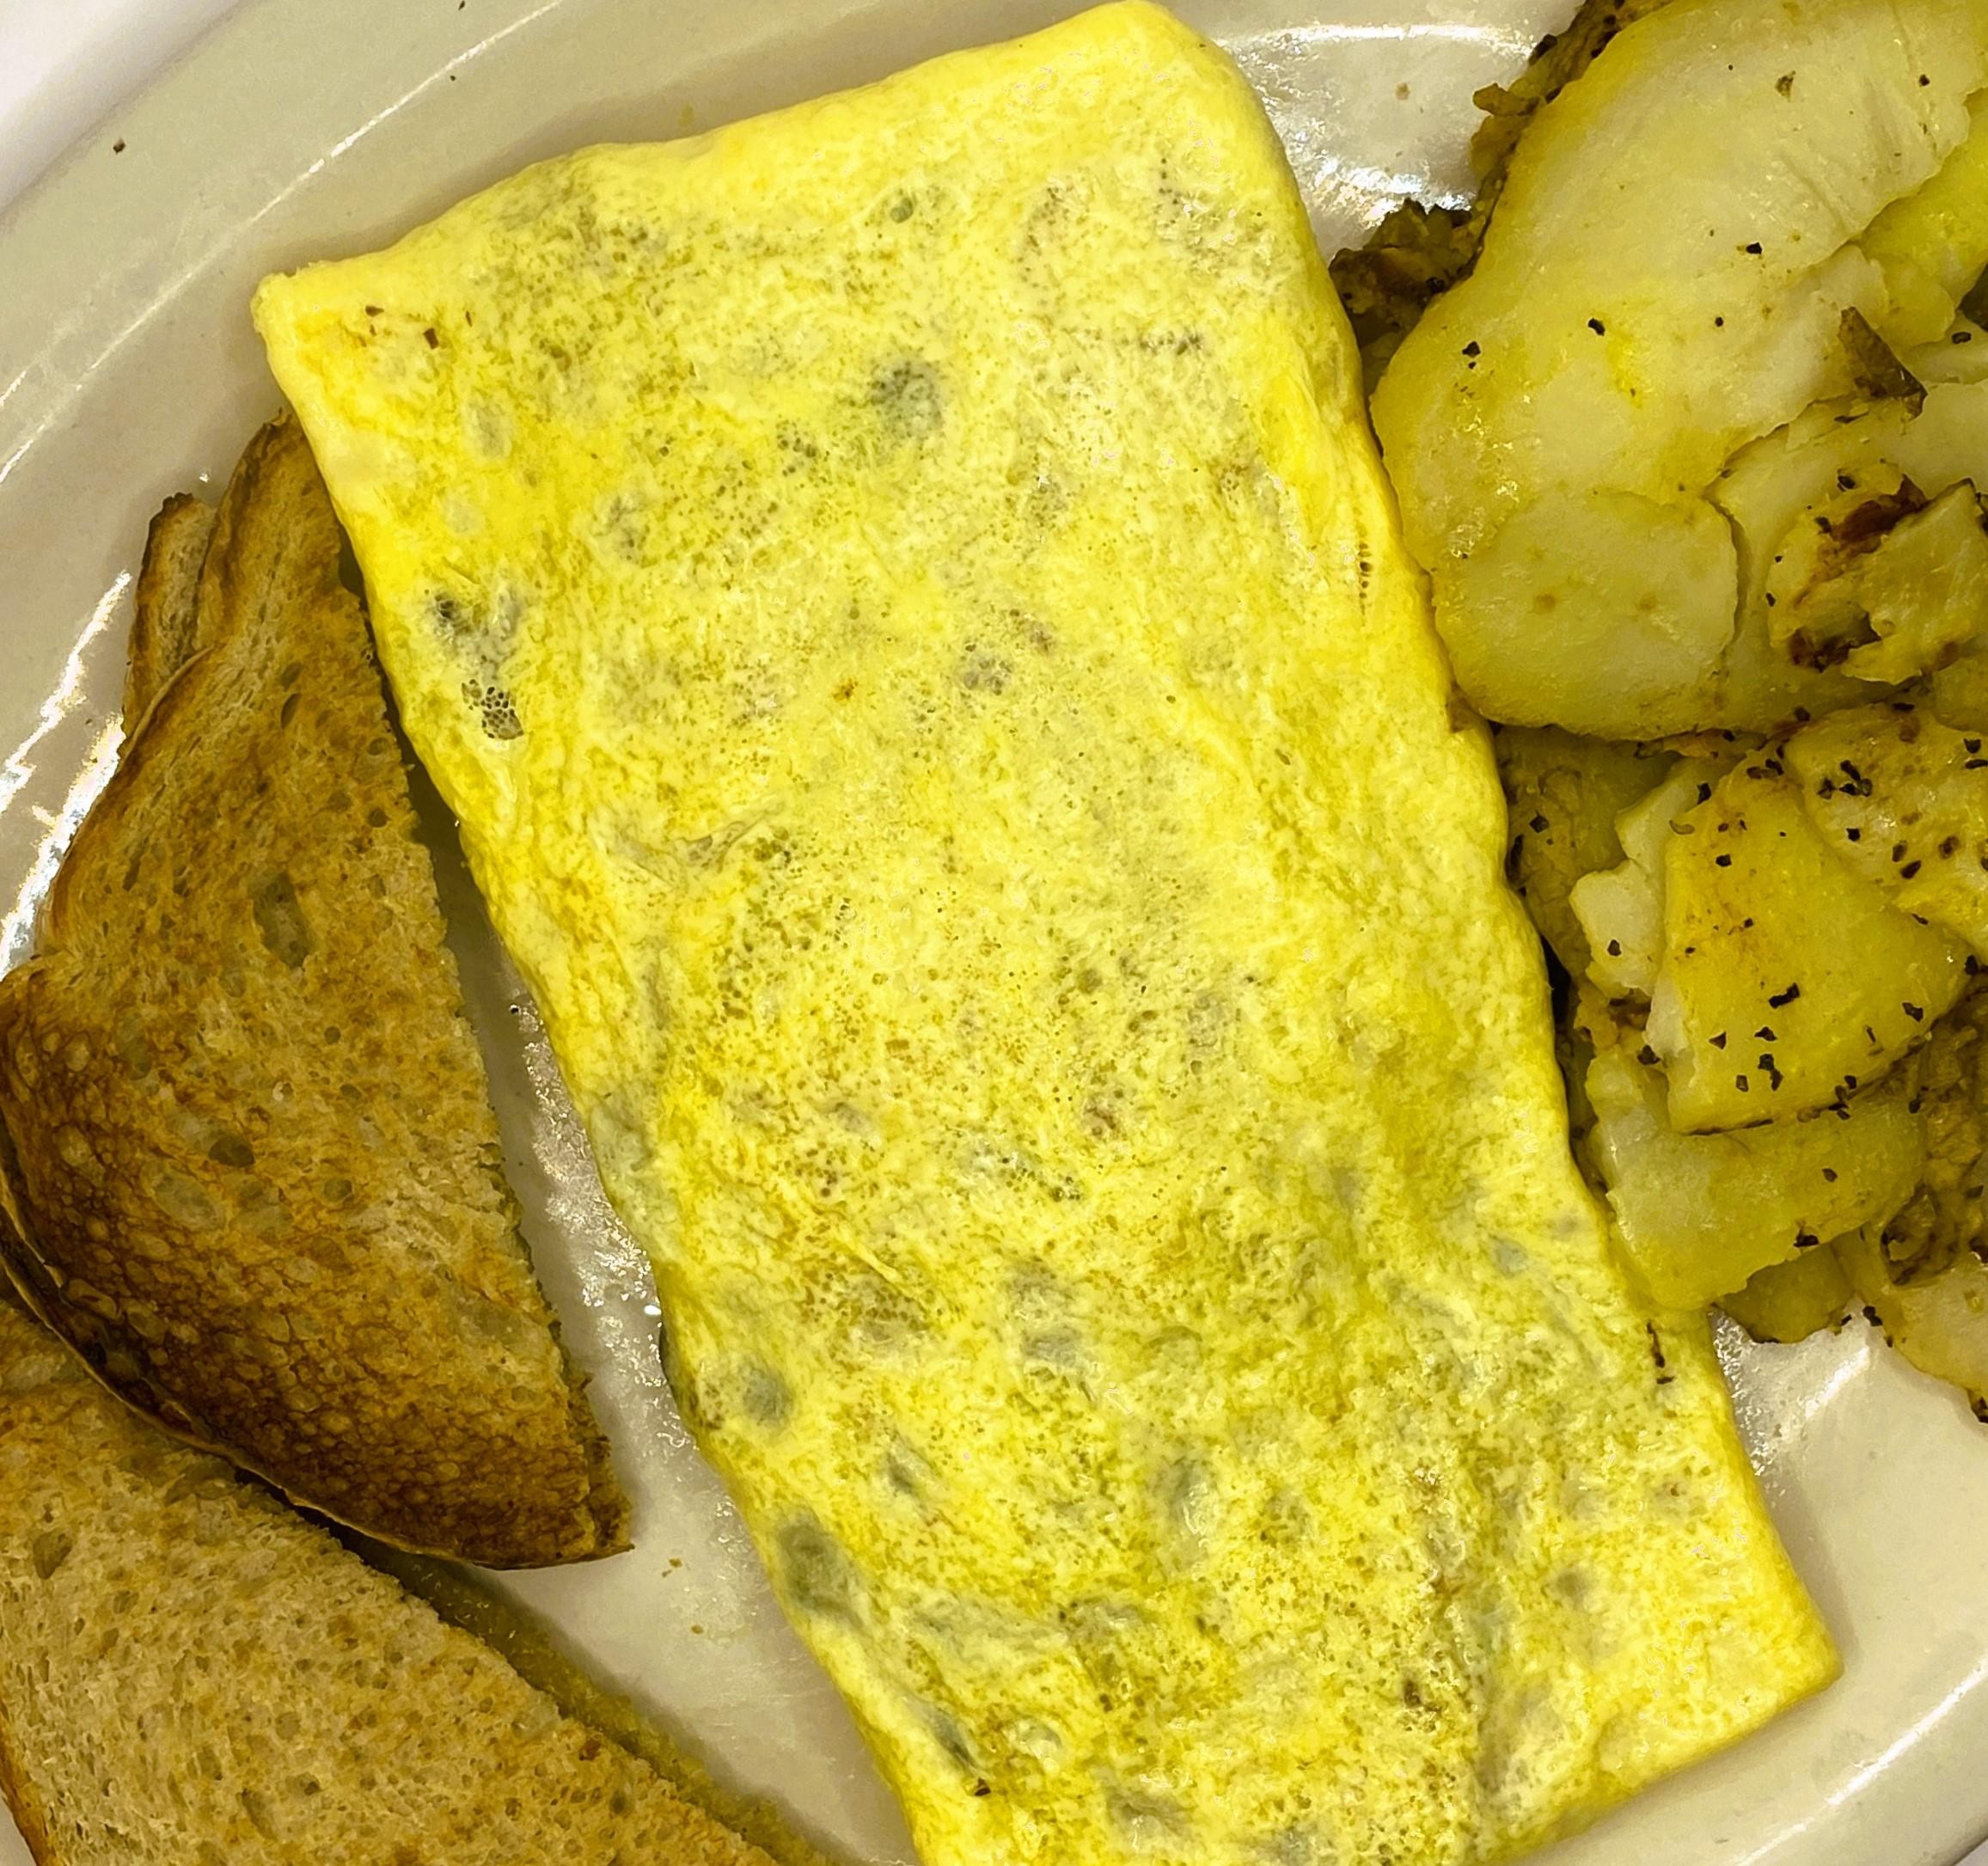 CREATE YOUR OWN OMELET